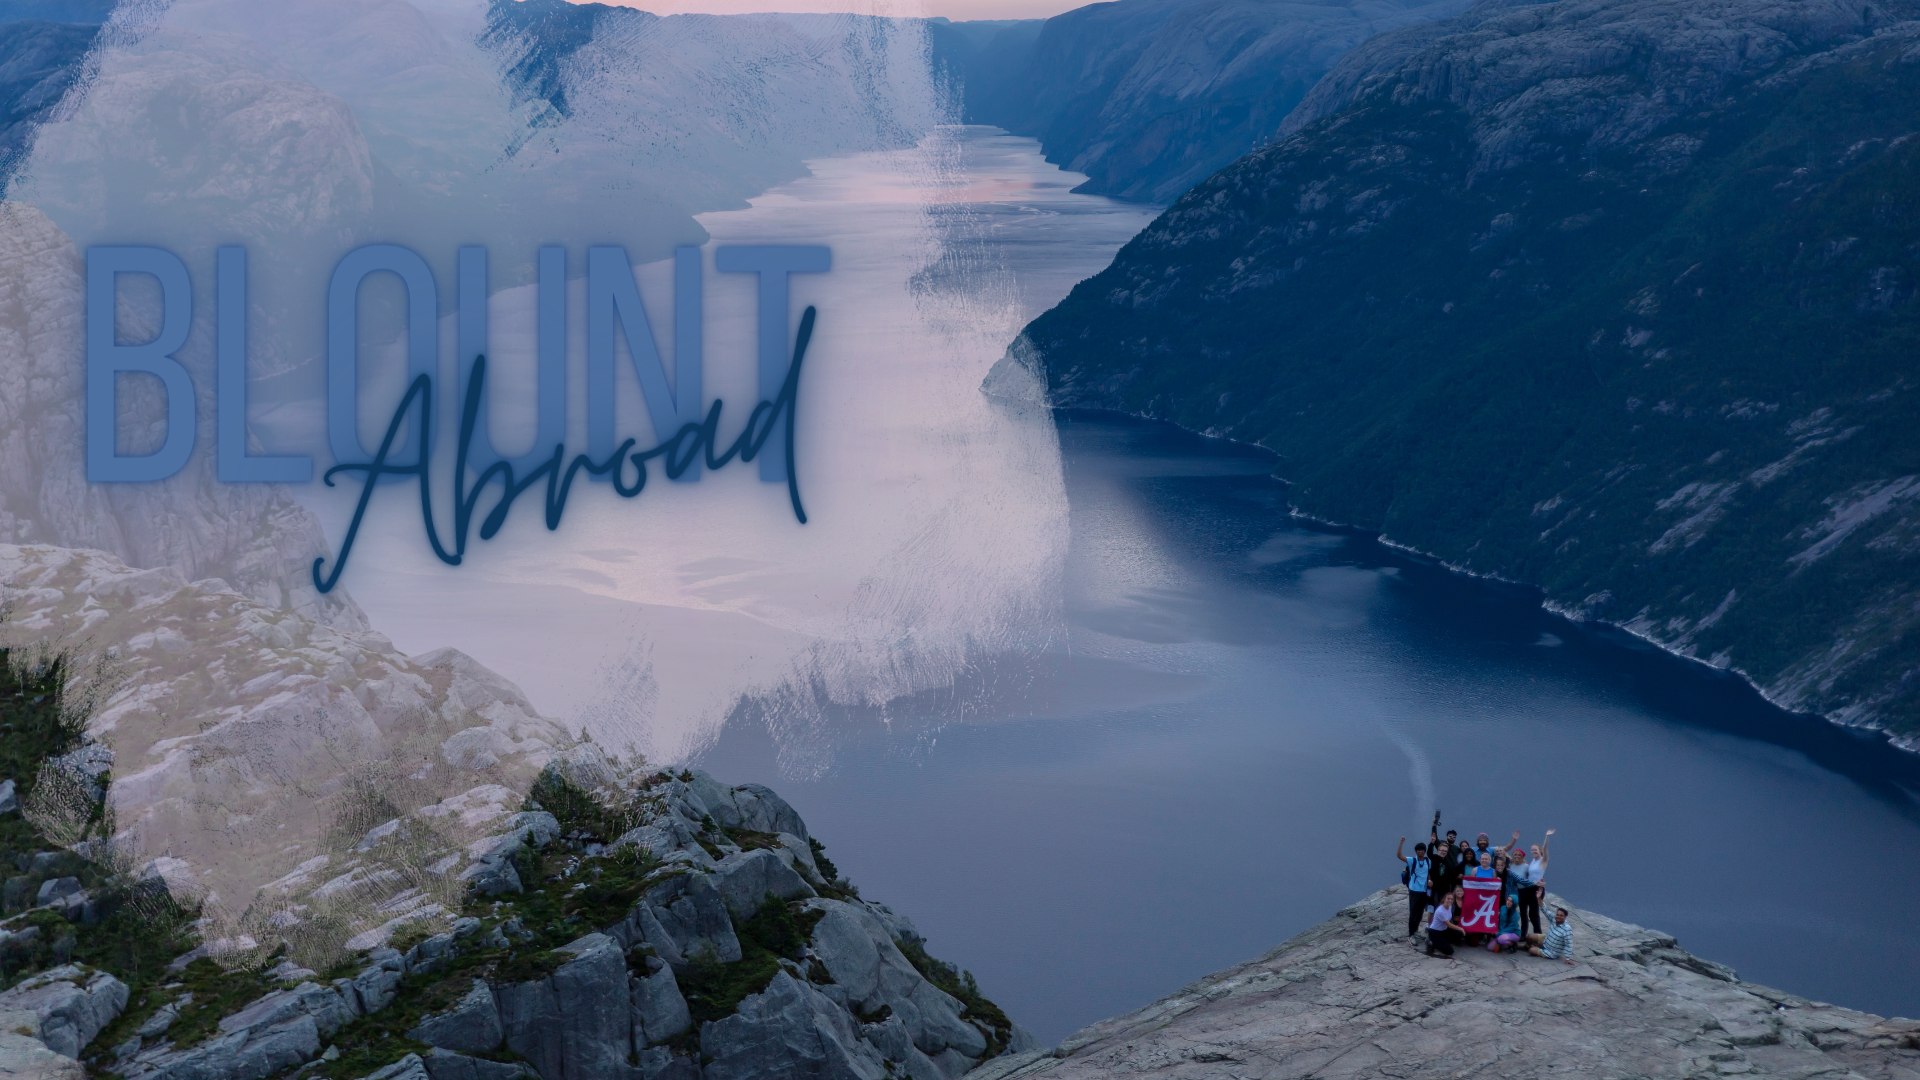 Blount students in Norway on a cliff overlooking a mountain range and fjord. Text reads "Blount Abroad."